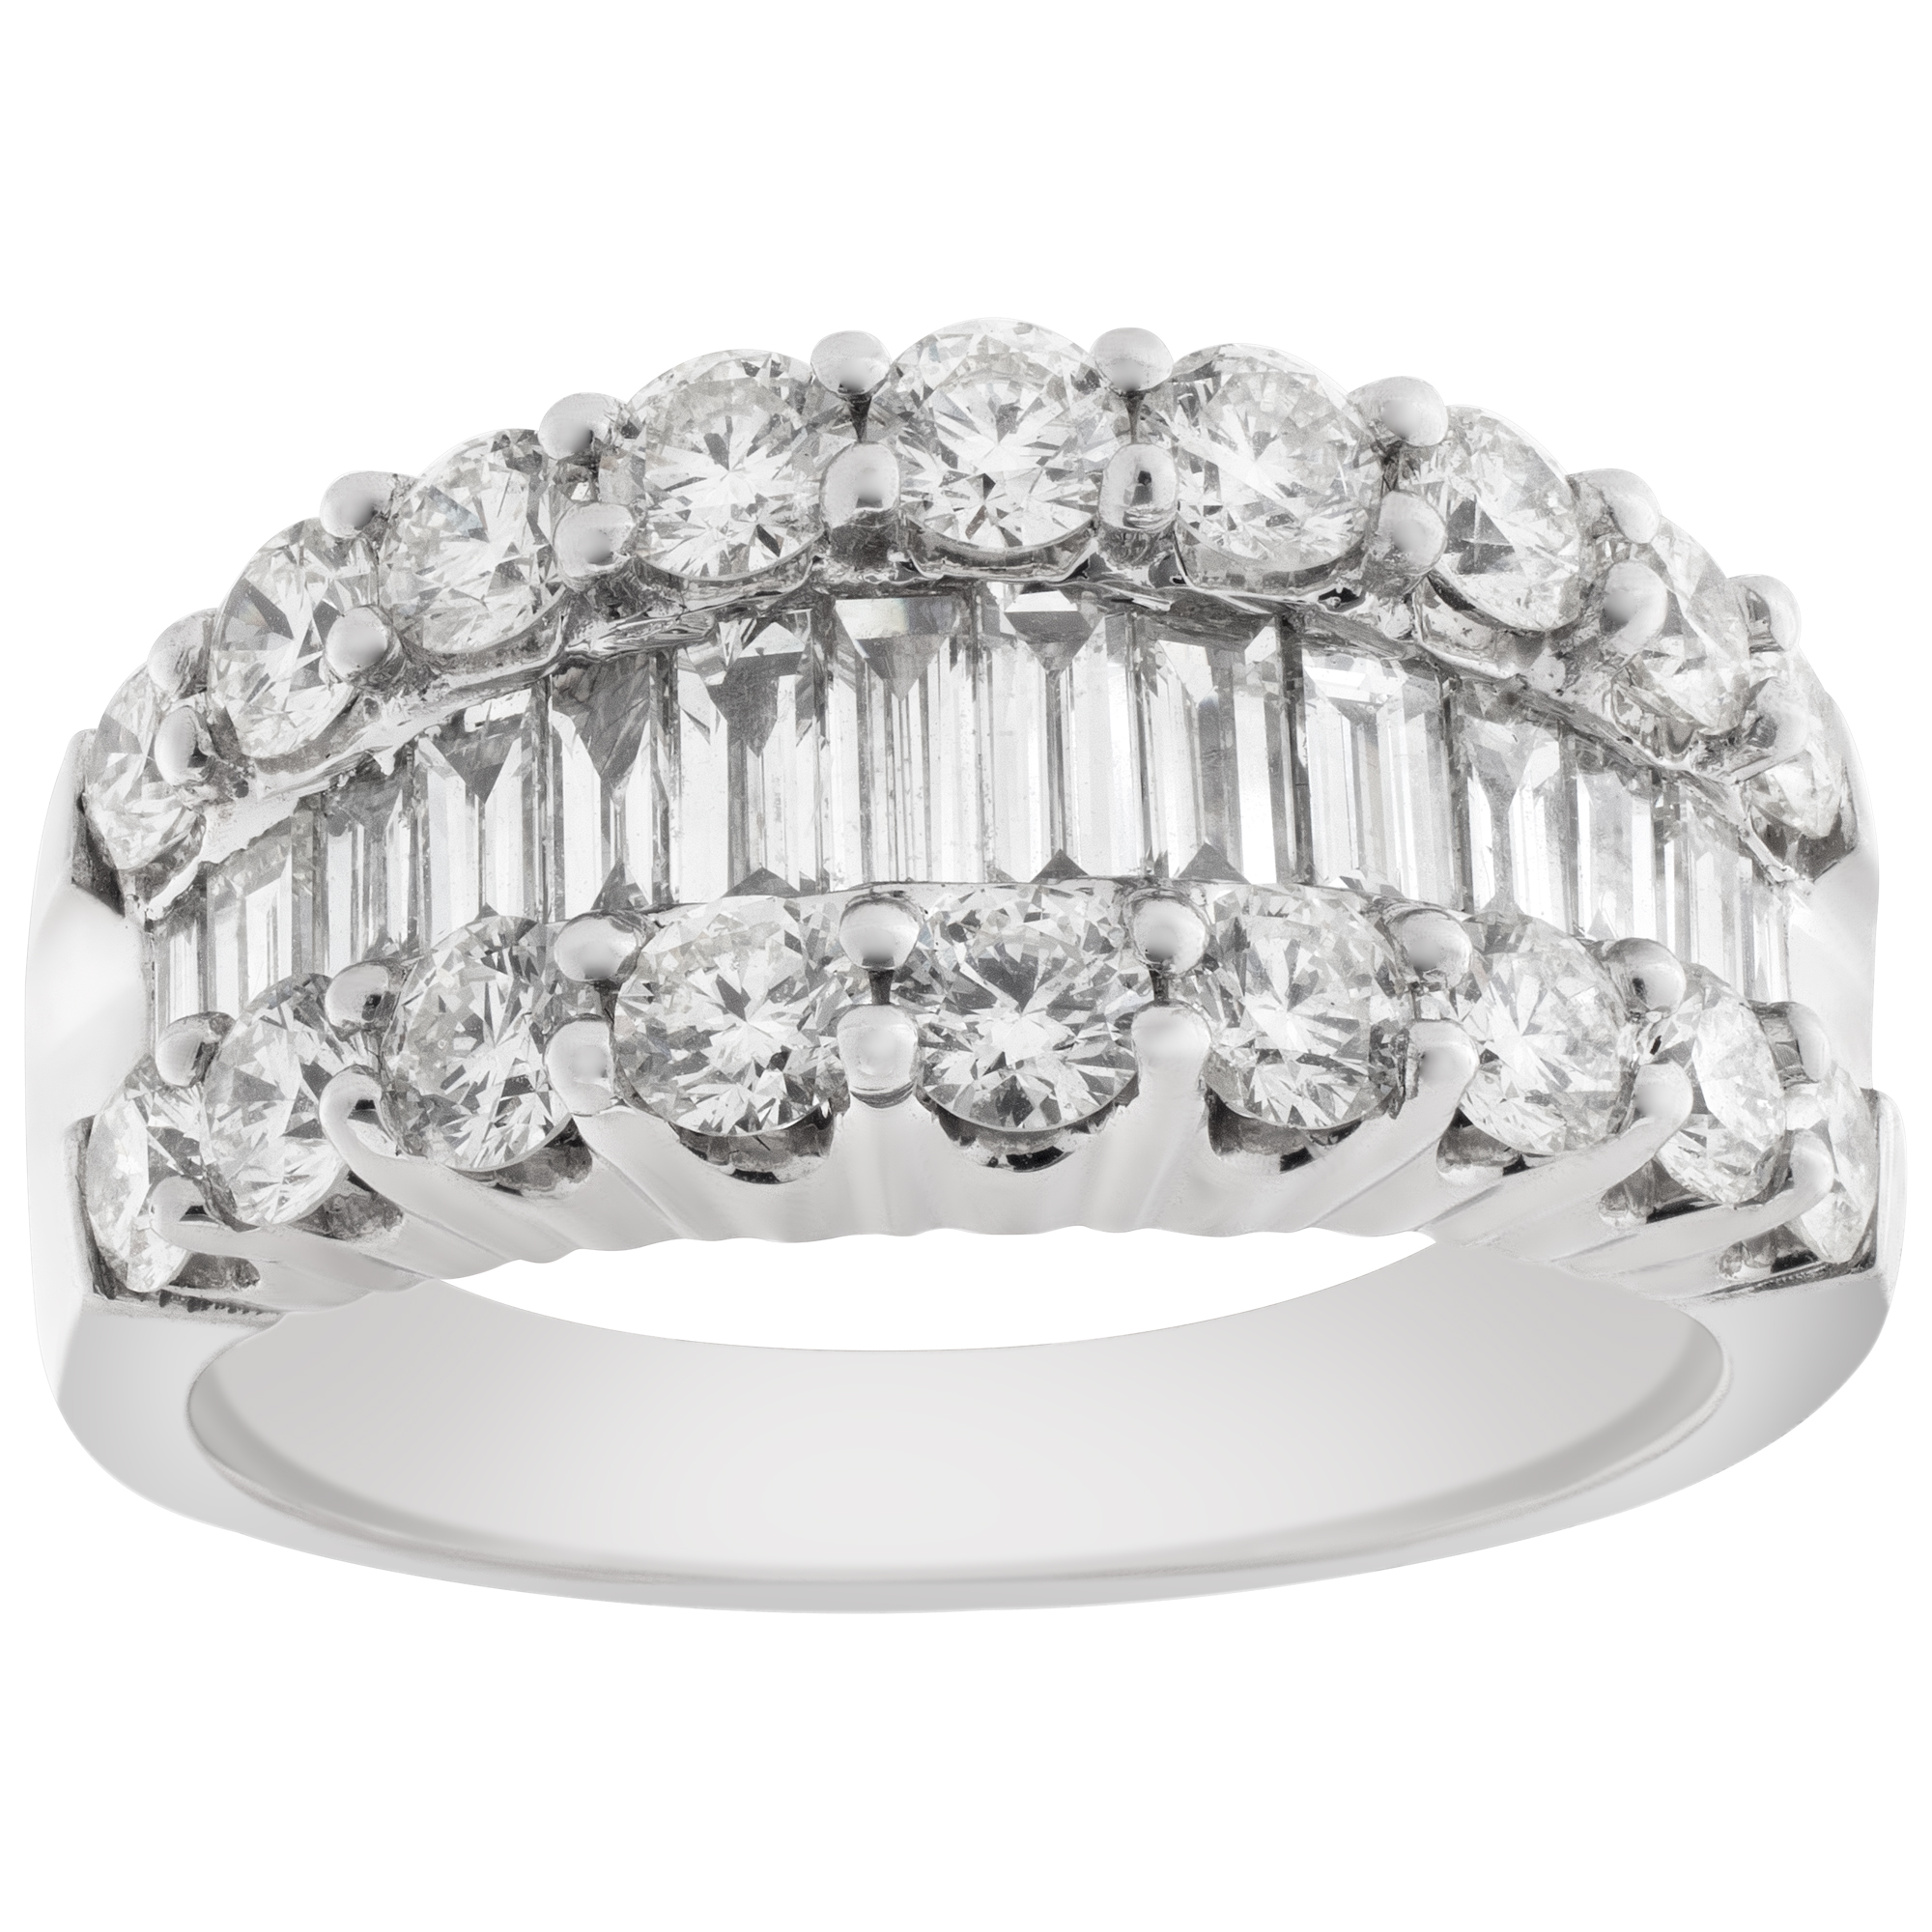 Ladies ring in 14k white gold with 2.81cts in round and baguette diamonds image 1